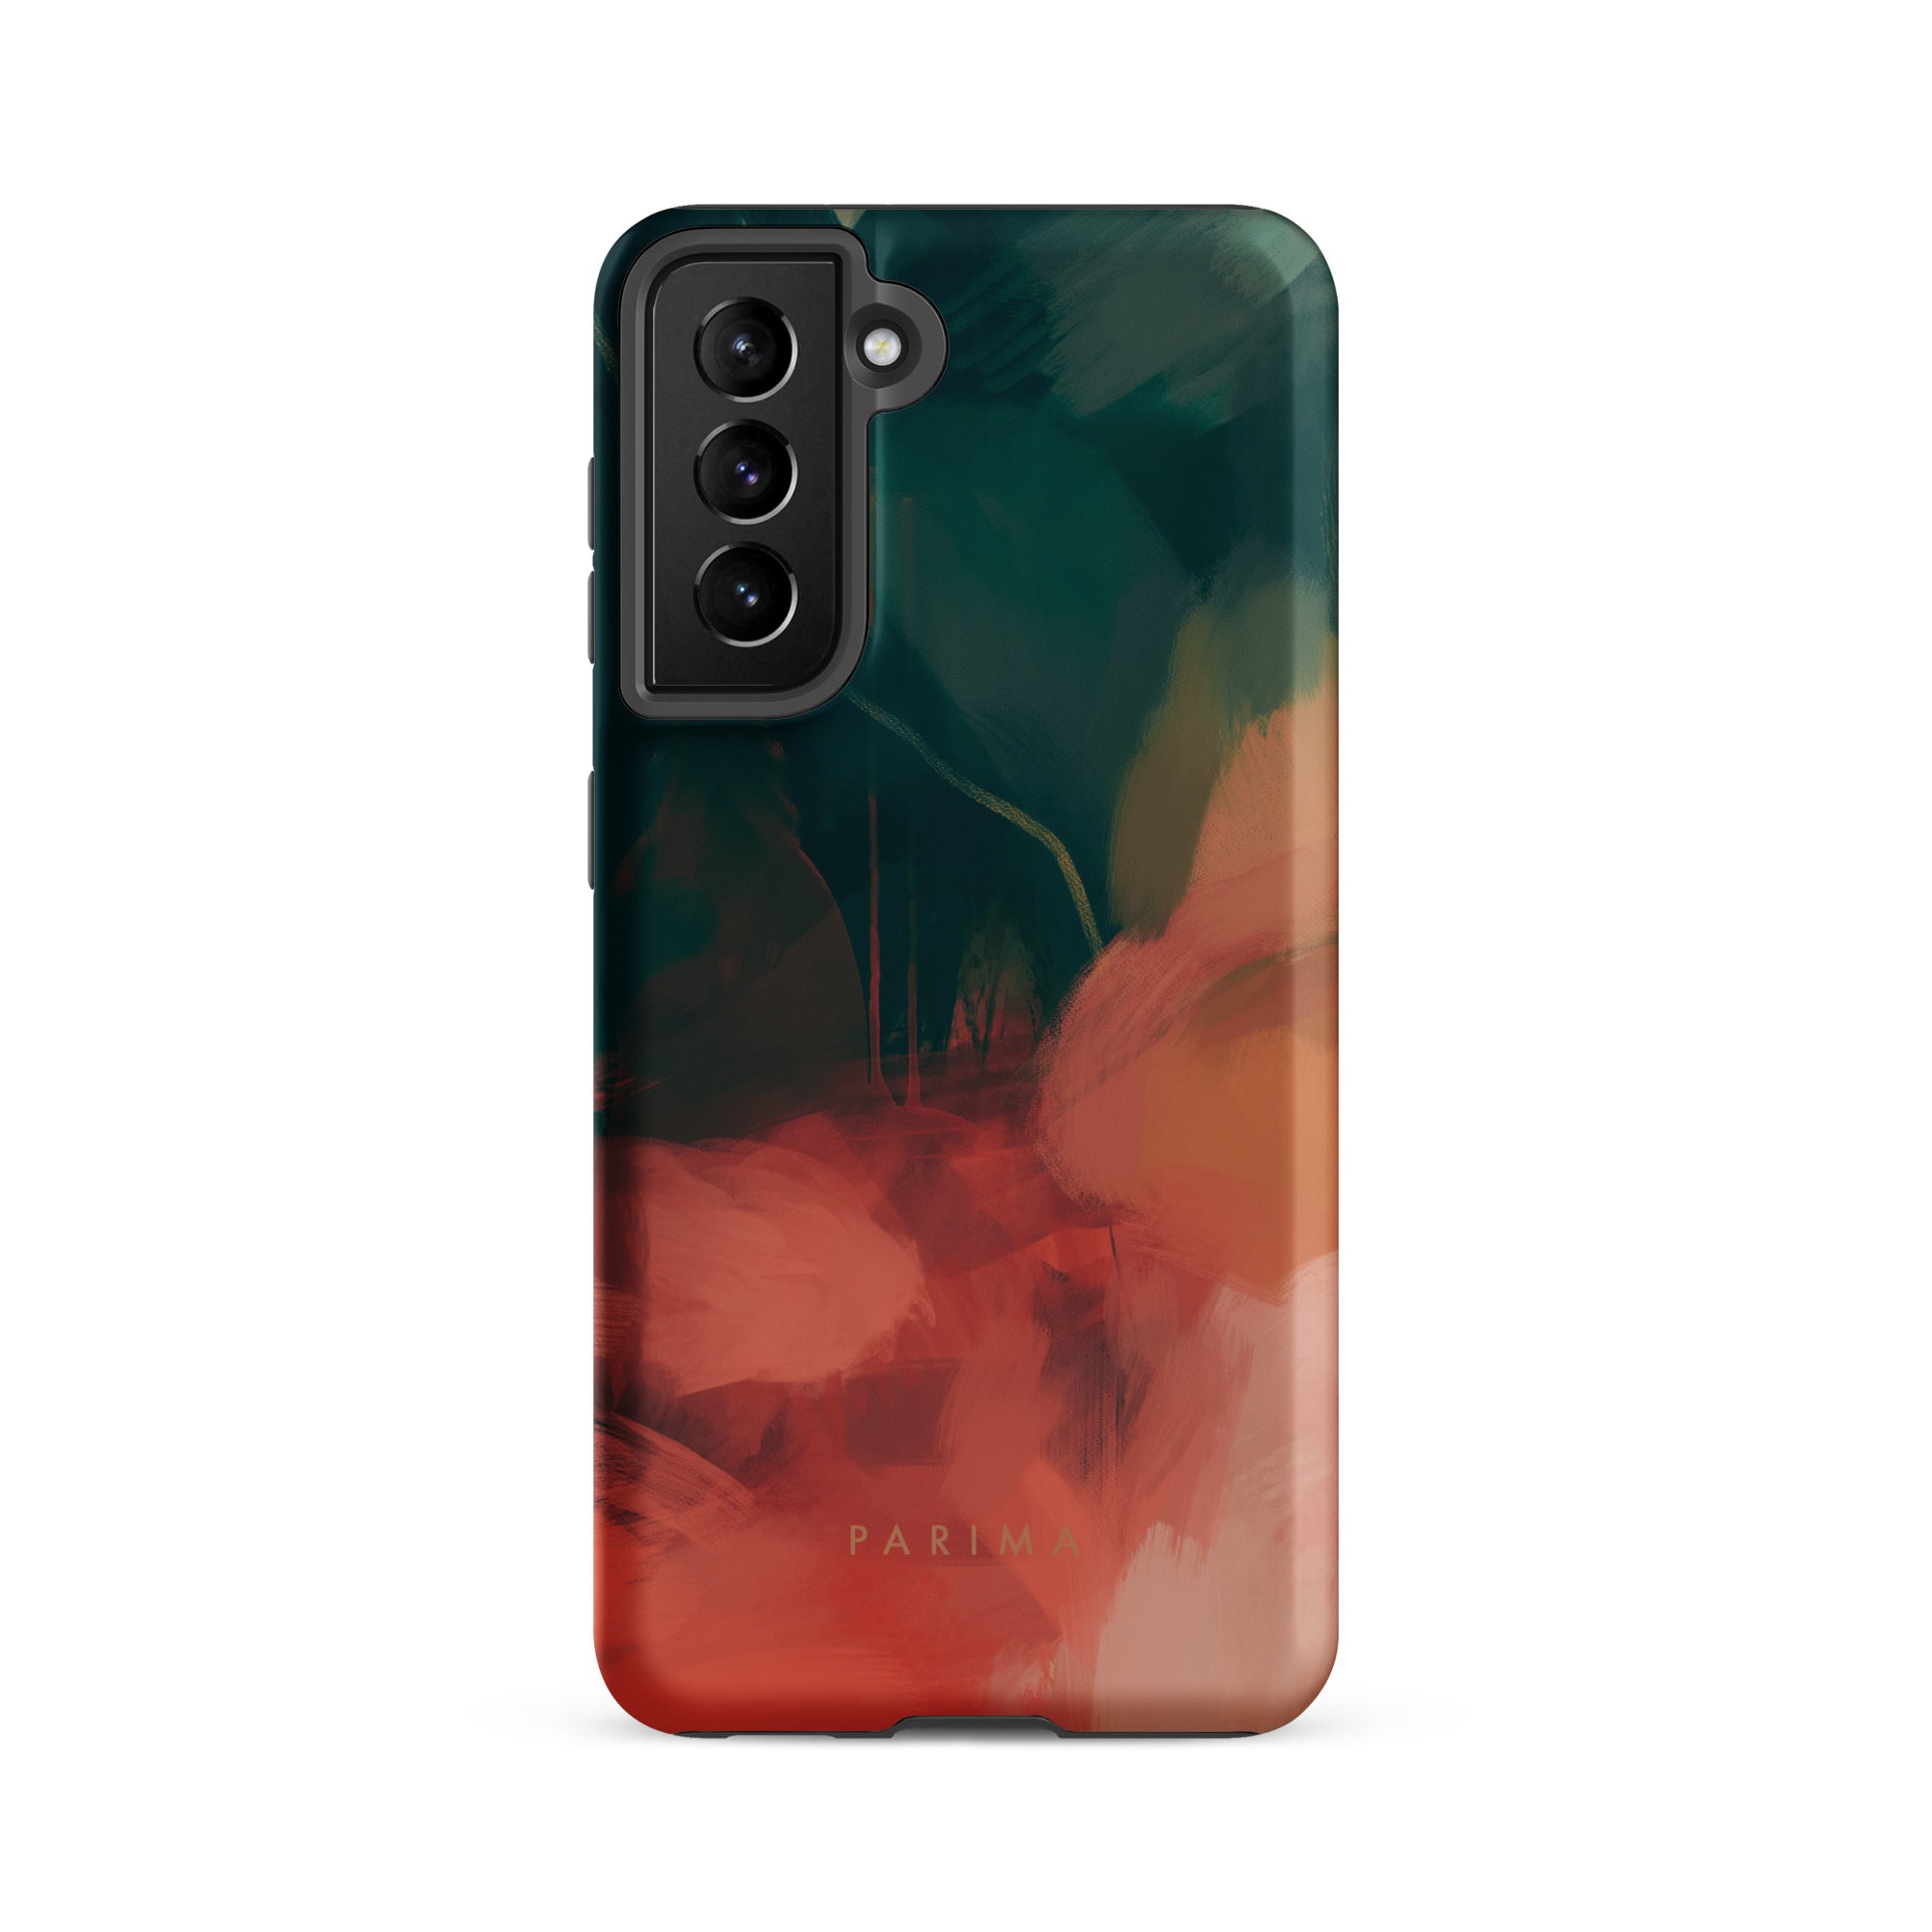 Eventide, green and red abstract art on Samsung Galaxy S21 fe tough case by Parima Studio